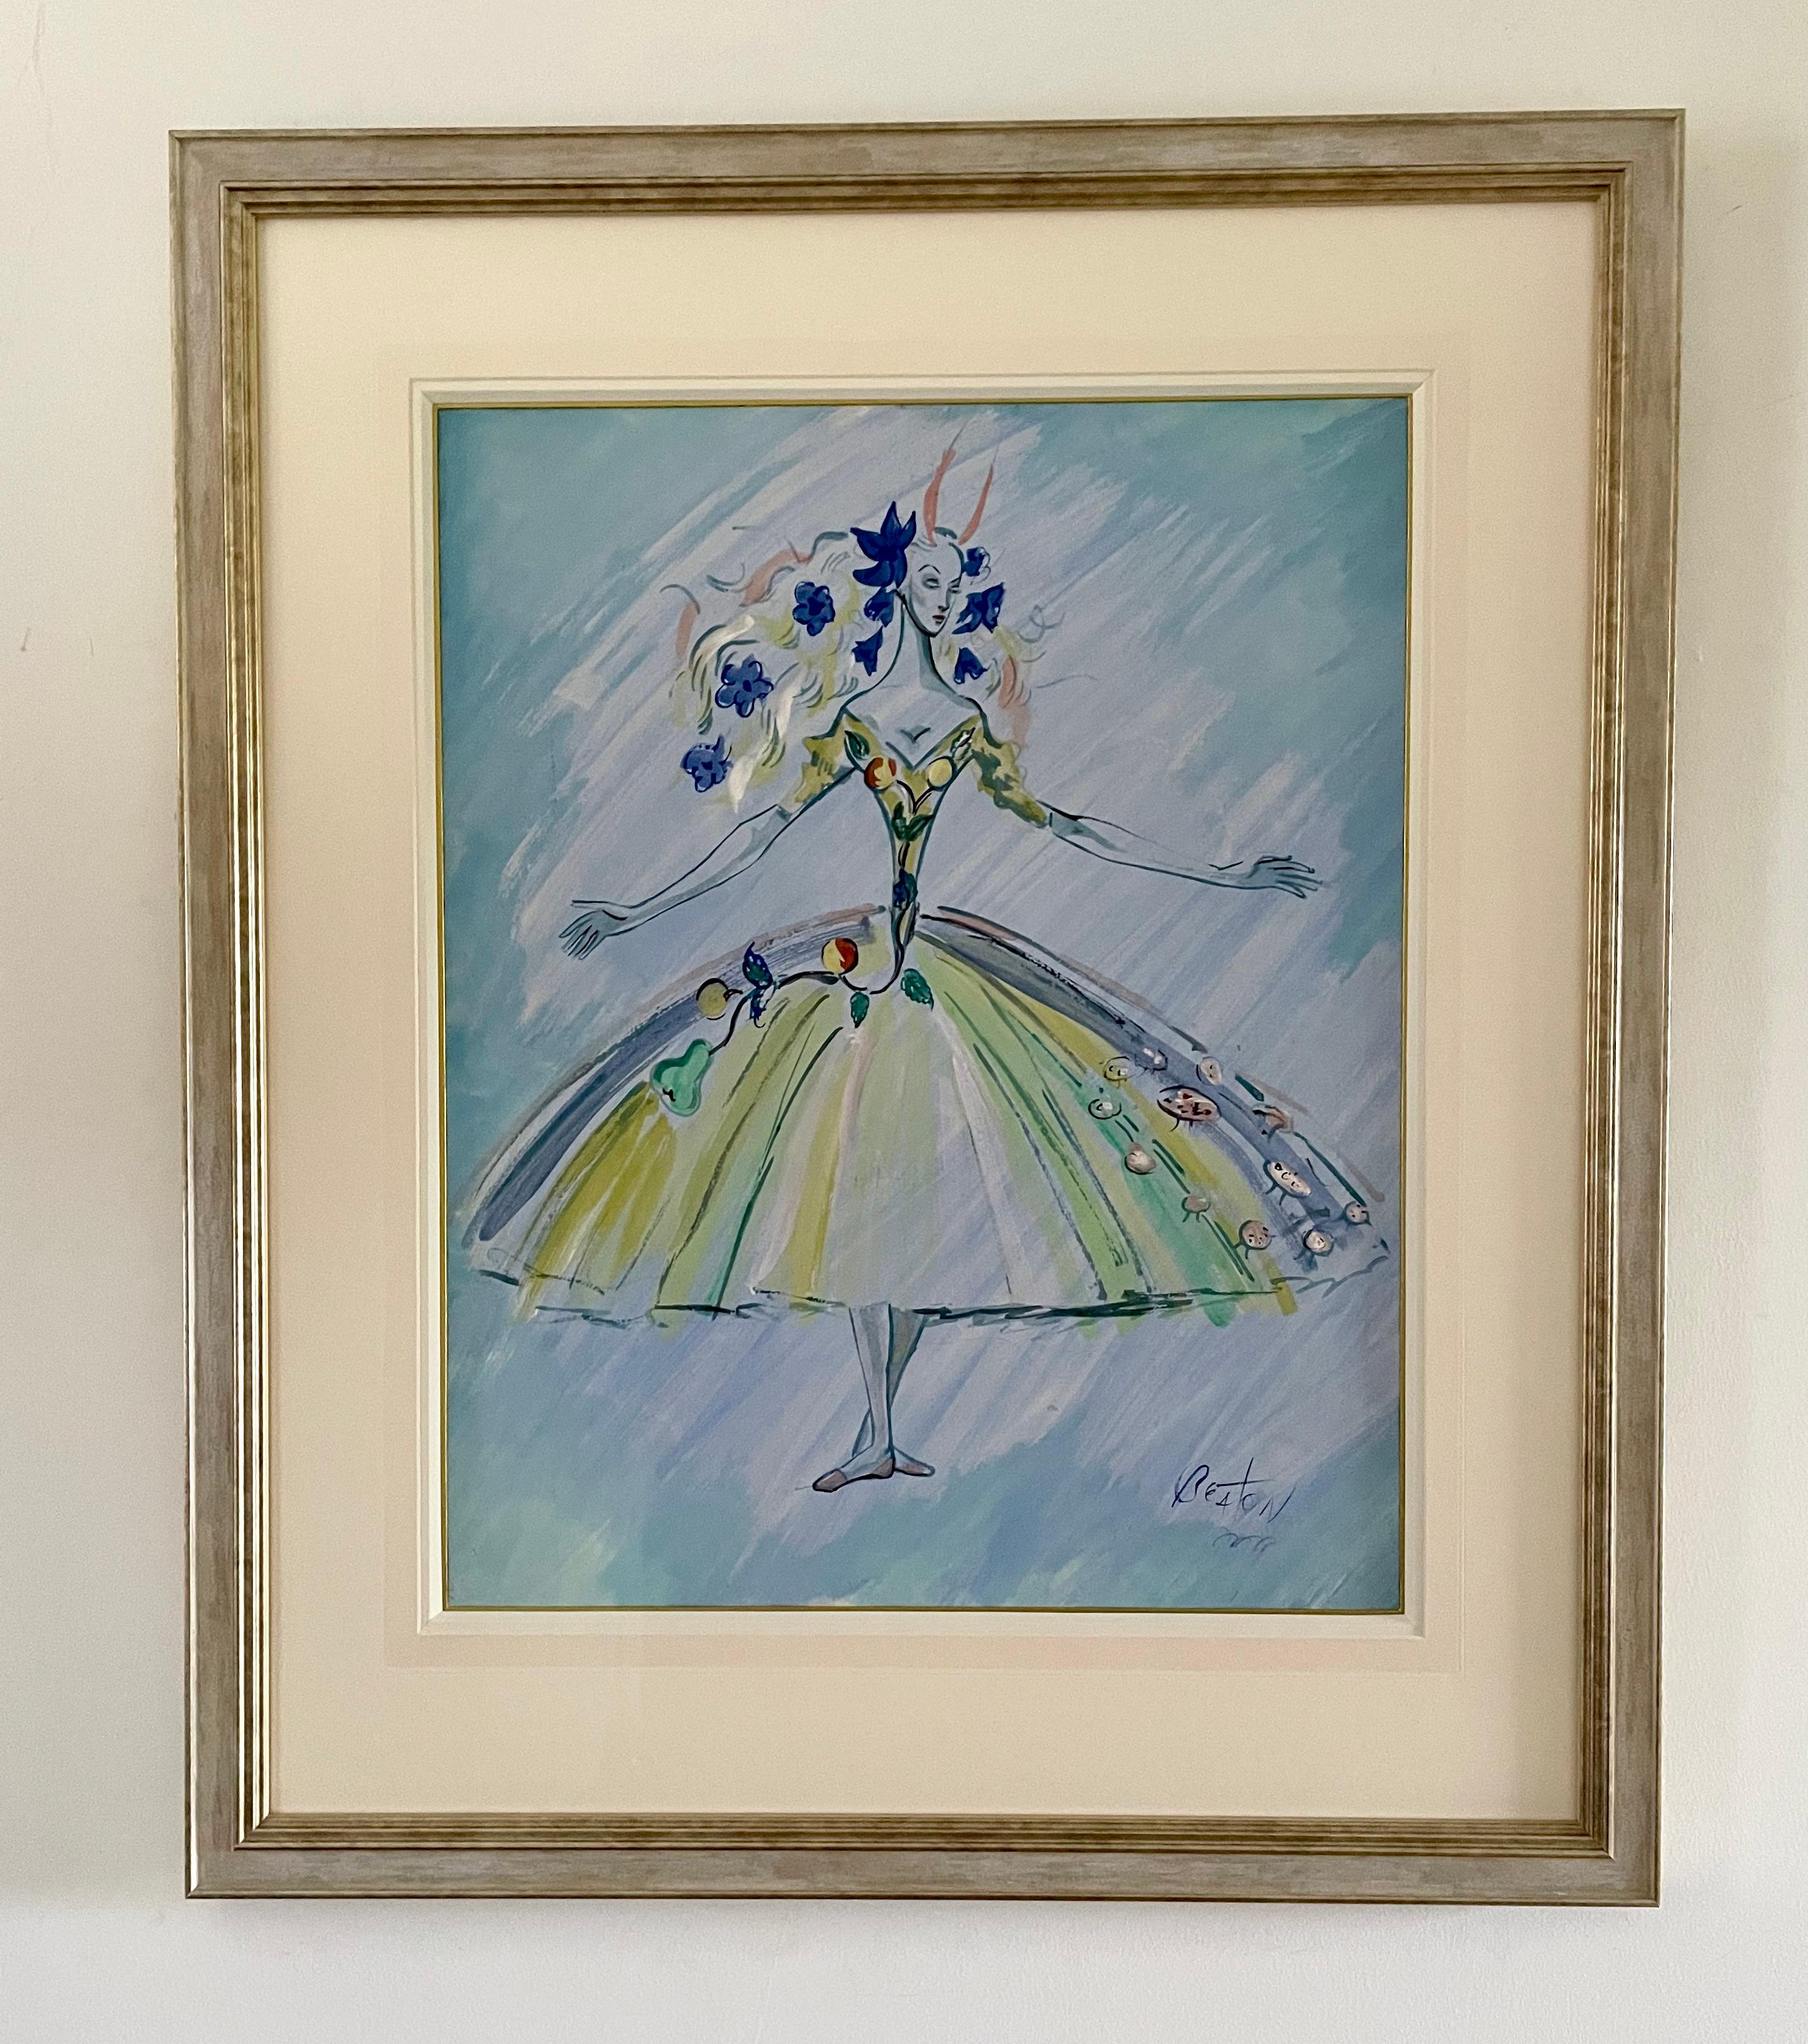 SIR CECIL BEATON, CBE
(1904-1980)

Ballet Costume Design for Le Pavillon - 1936

Signed and bears wardrobe mark l.r.: Beaton
Watercolour and ink

49 by 39 cm., 19 ¼ by 15 ½ in.
(frame size 70.5 by 60 cm., 27 ¾  by 23 ¾ in.)

Cecil Walter Hardy